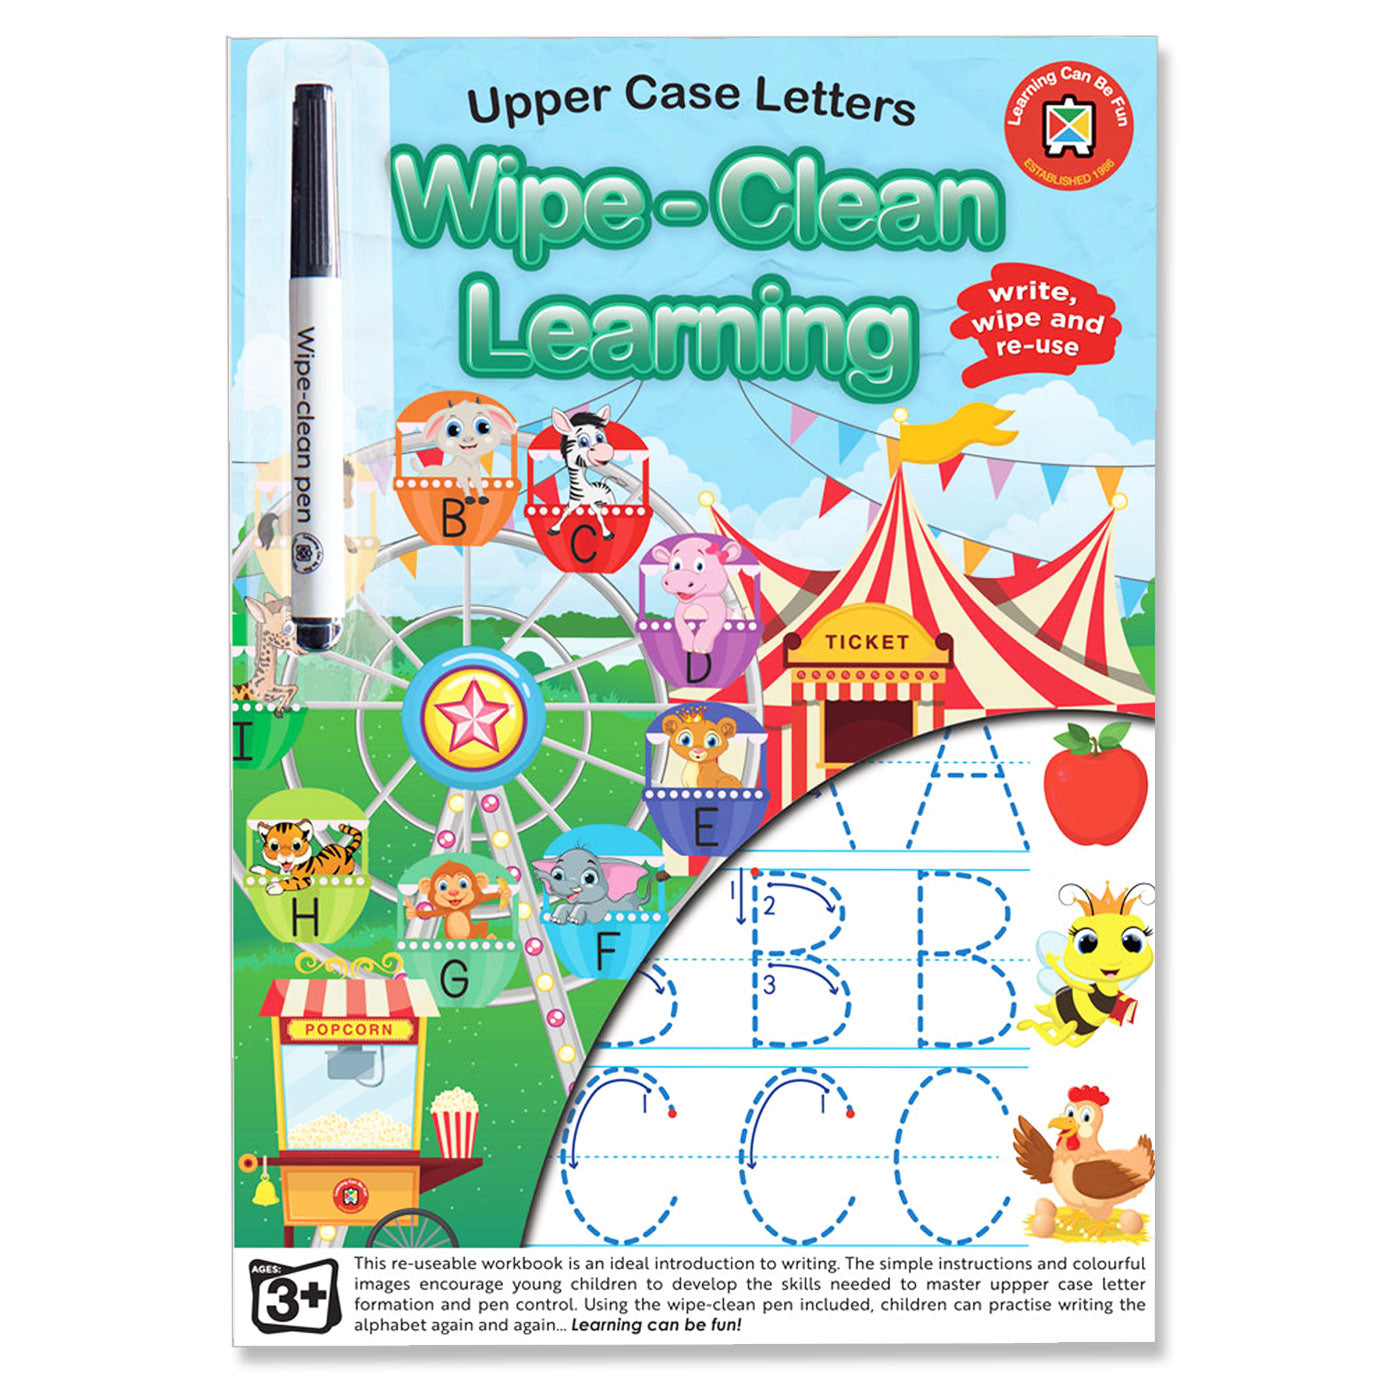 LCBF Wipe-Clean Reusable Learning Book Upper Case Letters with Marker